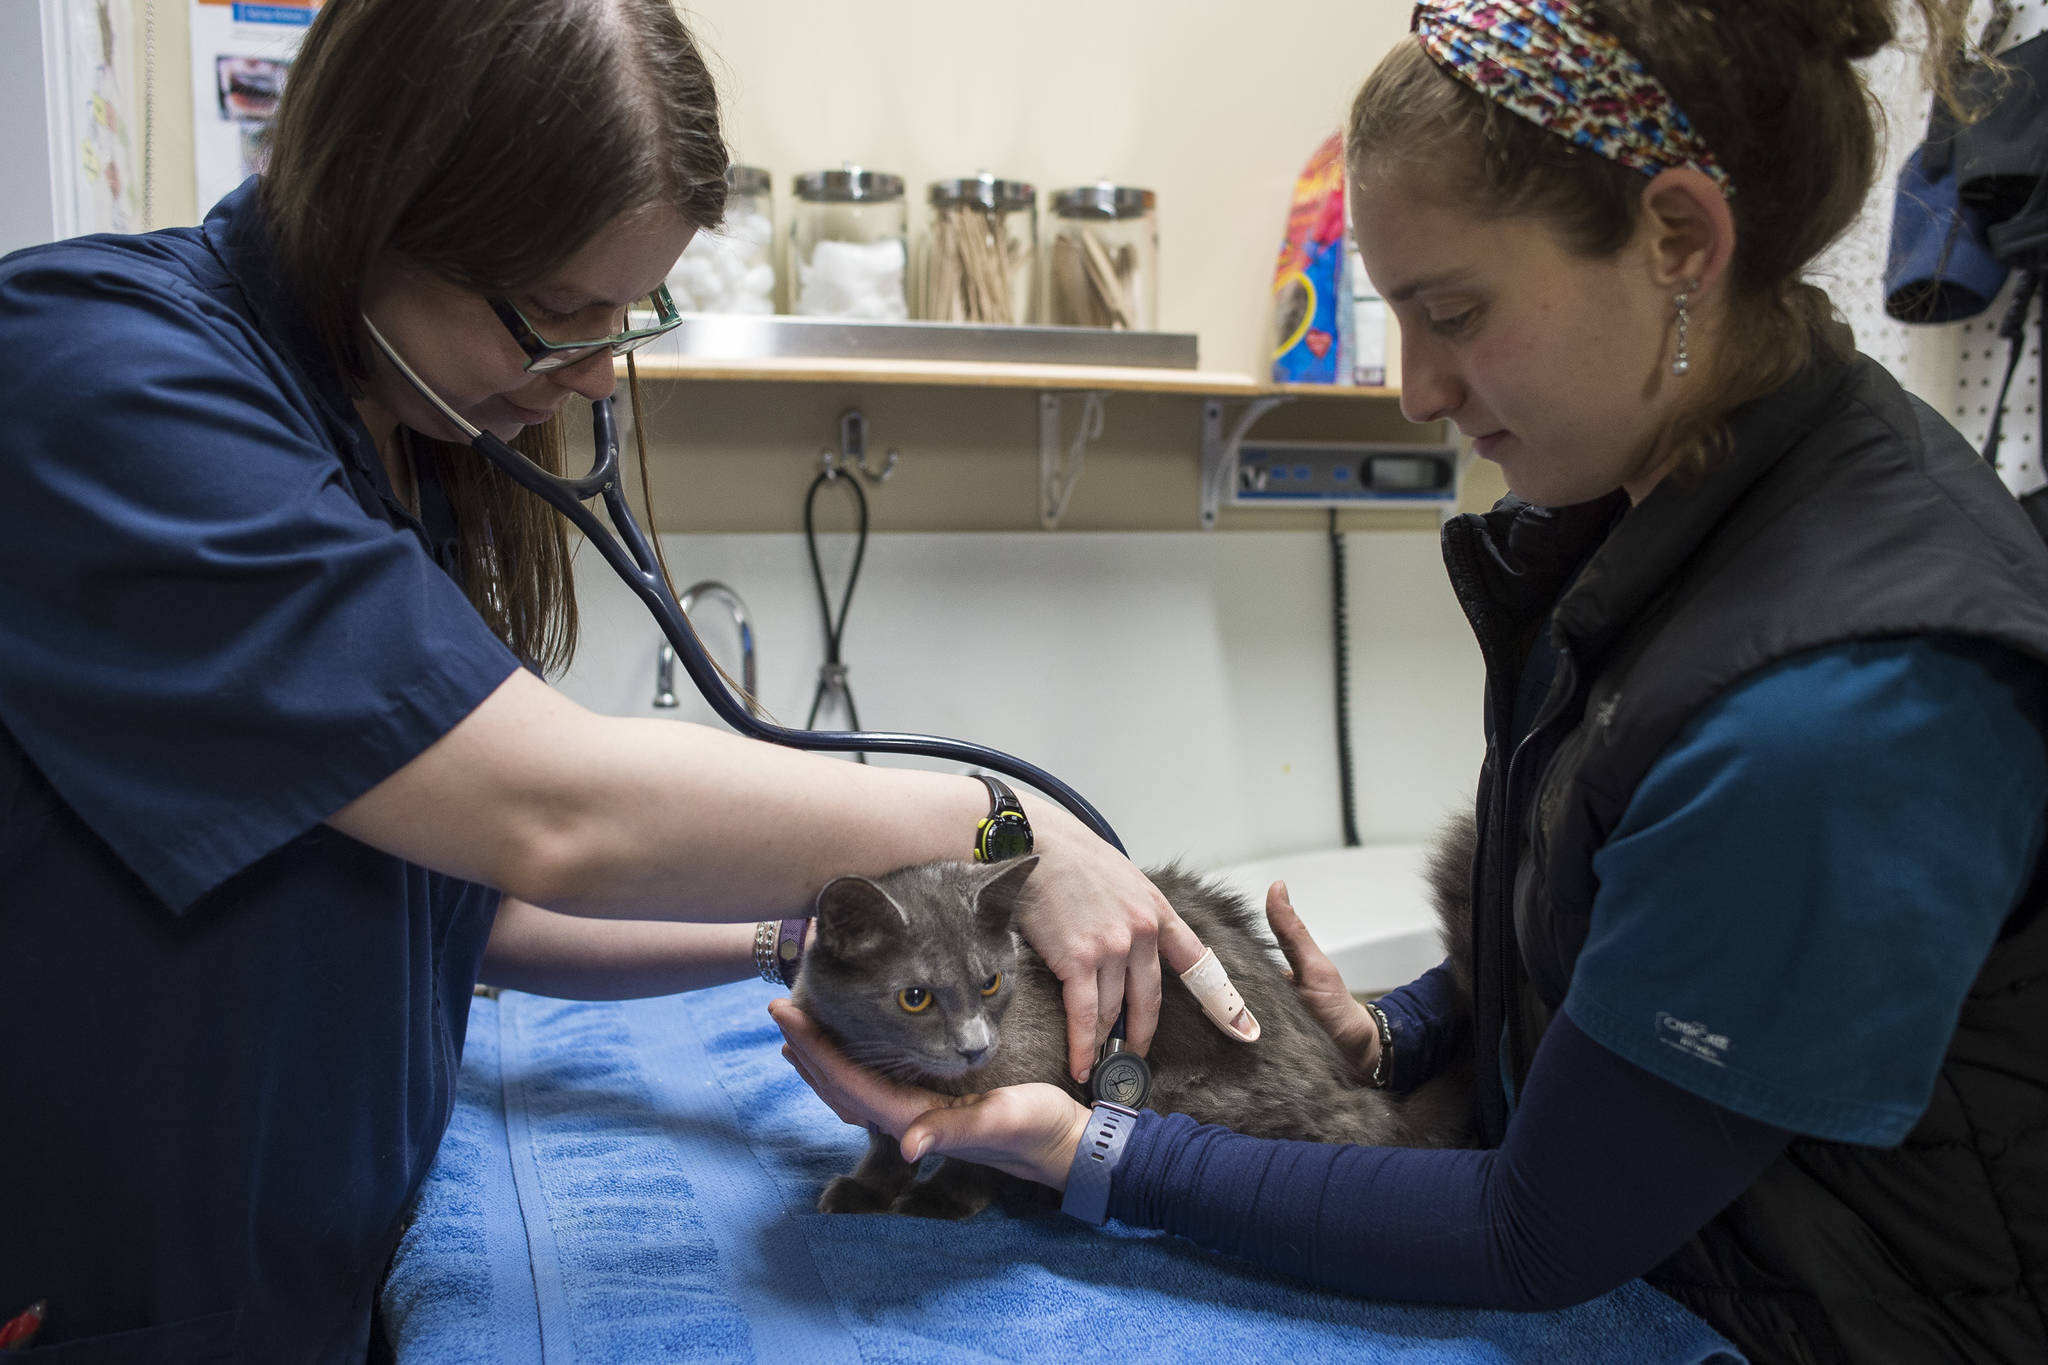 Dr. Jennifer Tobiason, of the Southeast Alaska Animal Medical Center, left, and Clinic Director Alicia Harris give a check up to a cat at the Gastineau Humane Society on Friday, Dec. 28, 2018. The society is starting the new year with a name change to Juneau Animal Rescue. (Michael Penn | Juneau Empire)